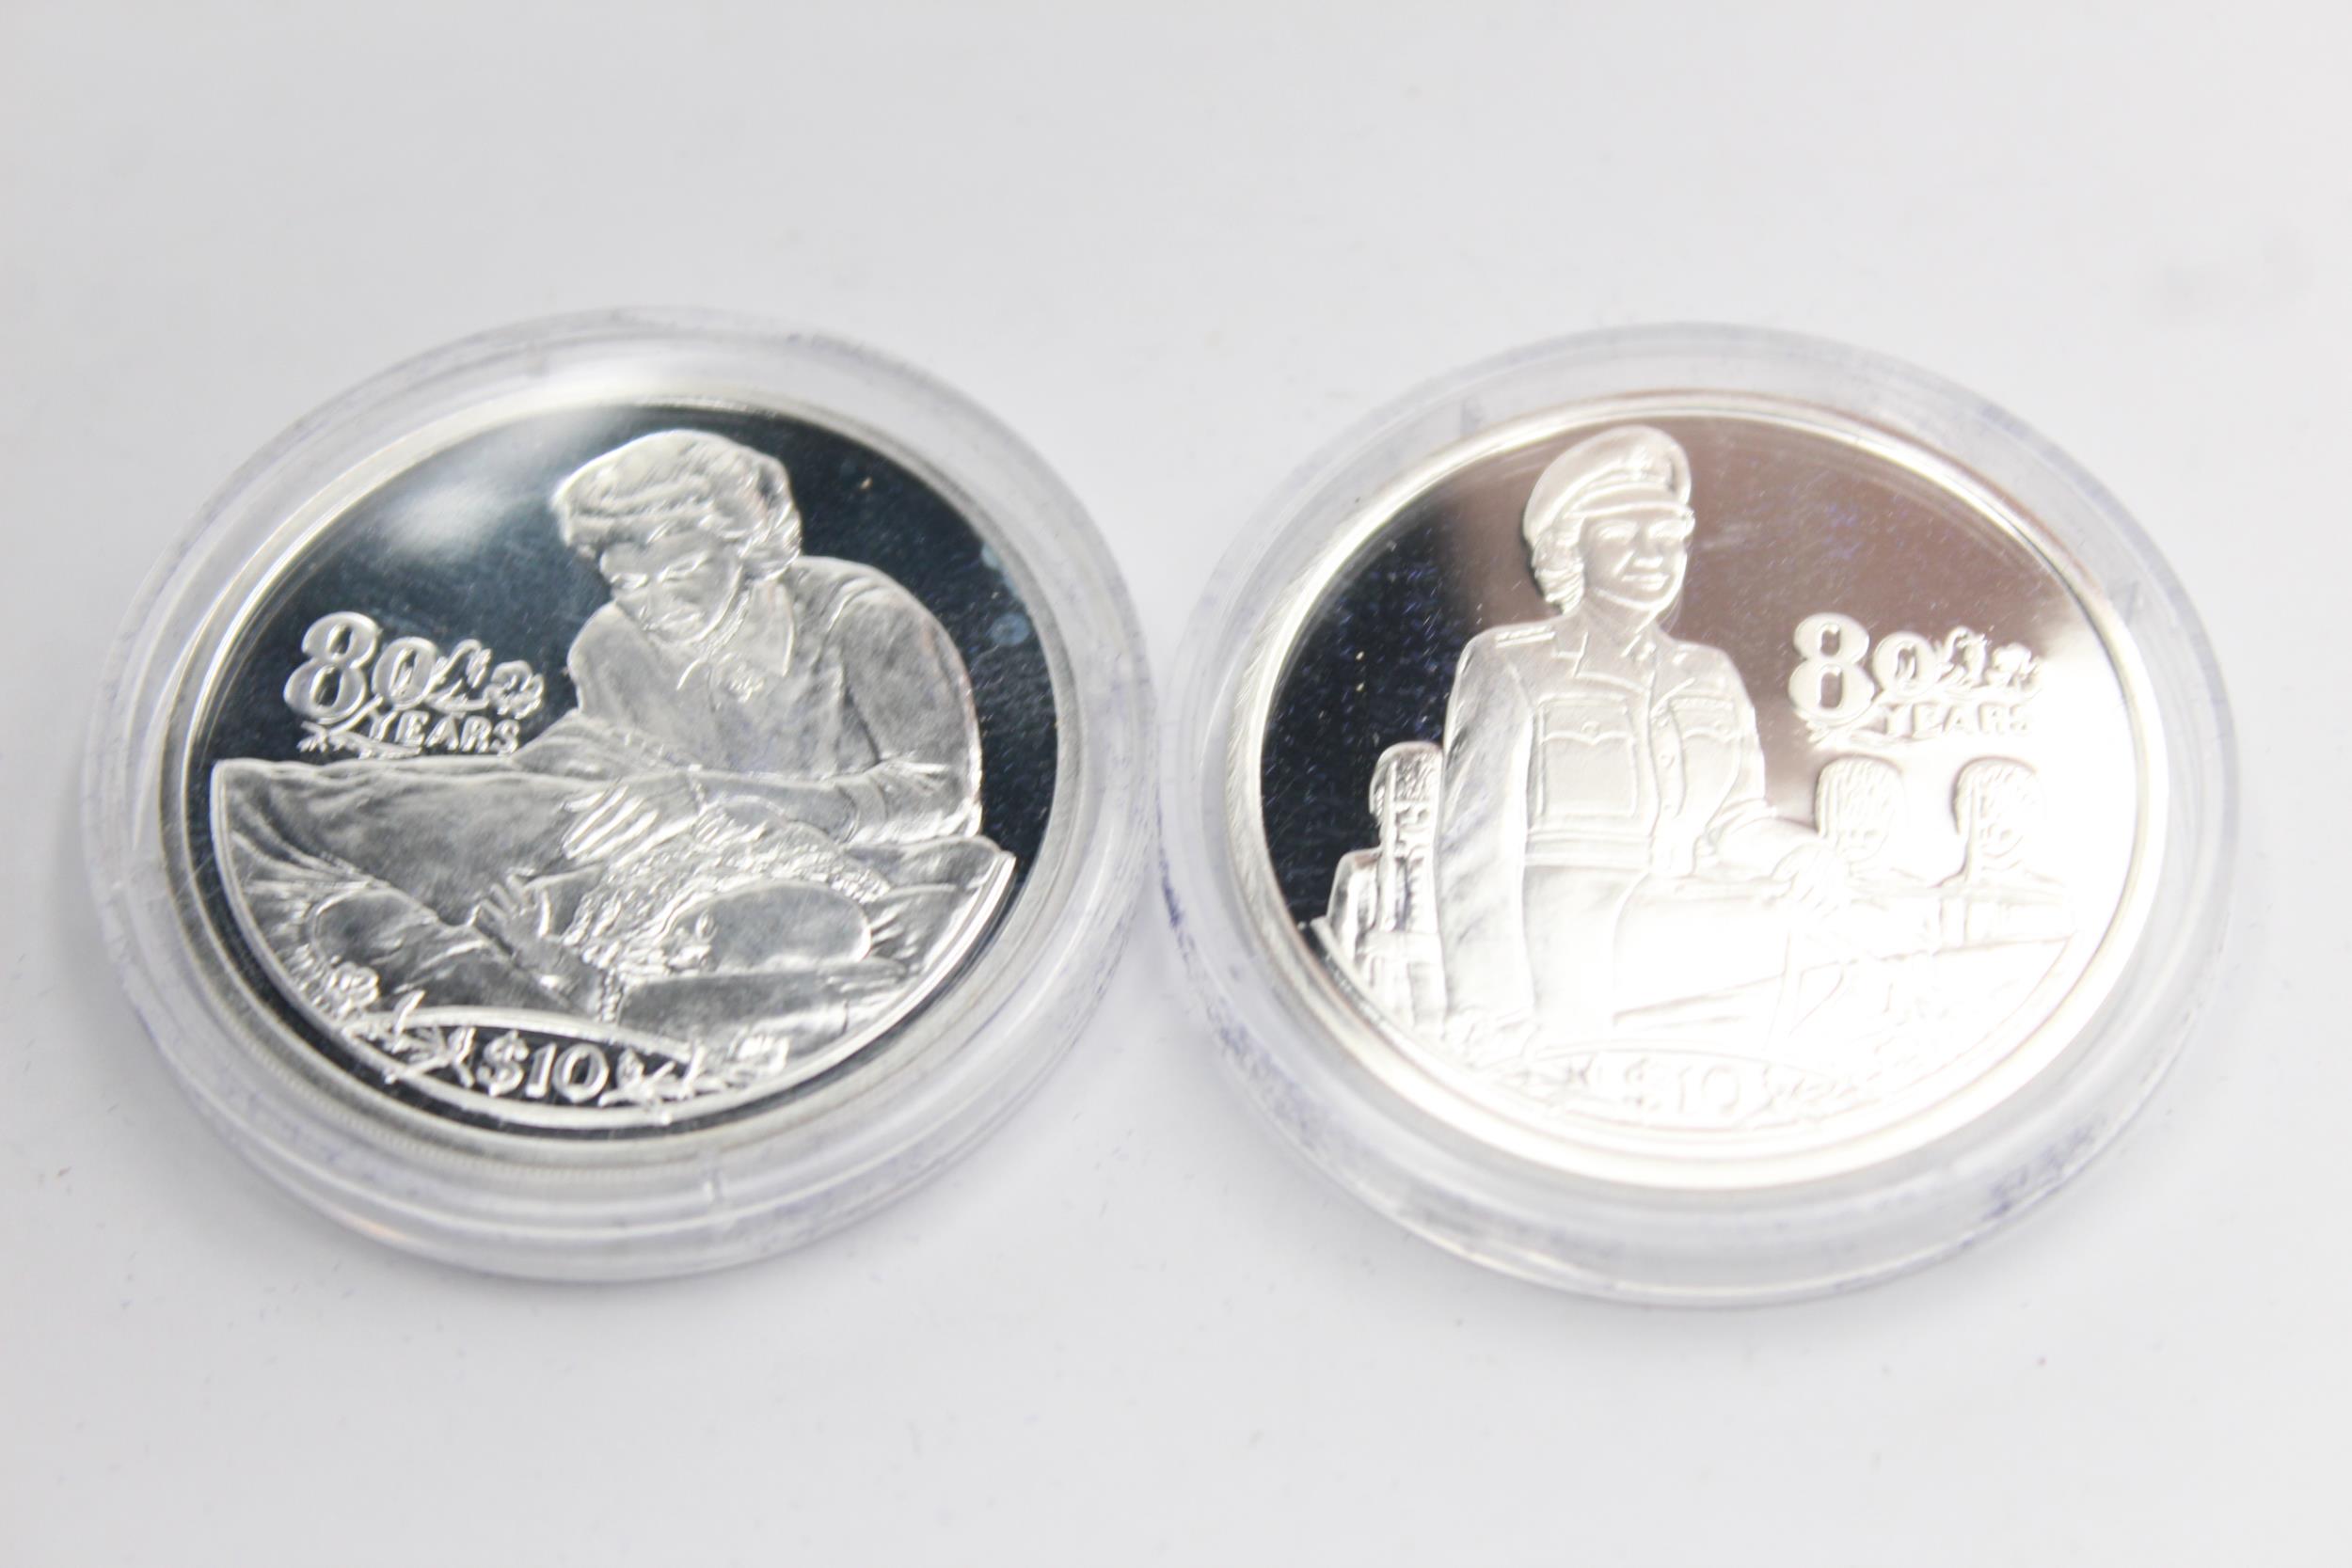 2 x 2006 Queen Elizabeth II 80 YEARS .999 FINE SILVER COINS, Liberia $10 (62g) // All items are - Image 4 of 4